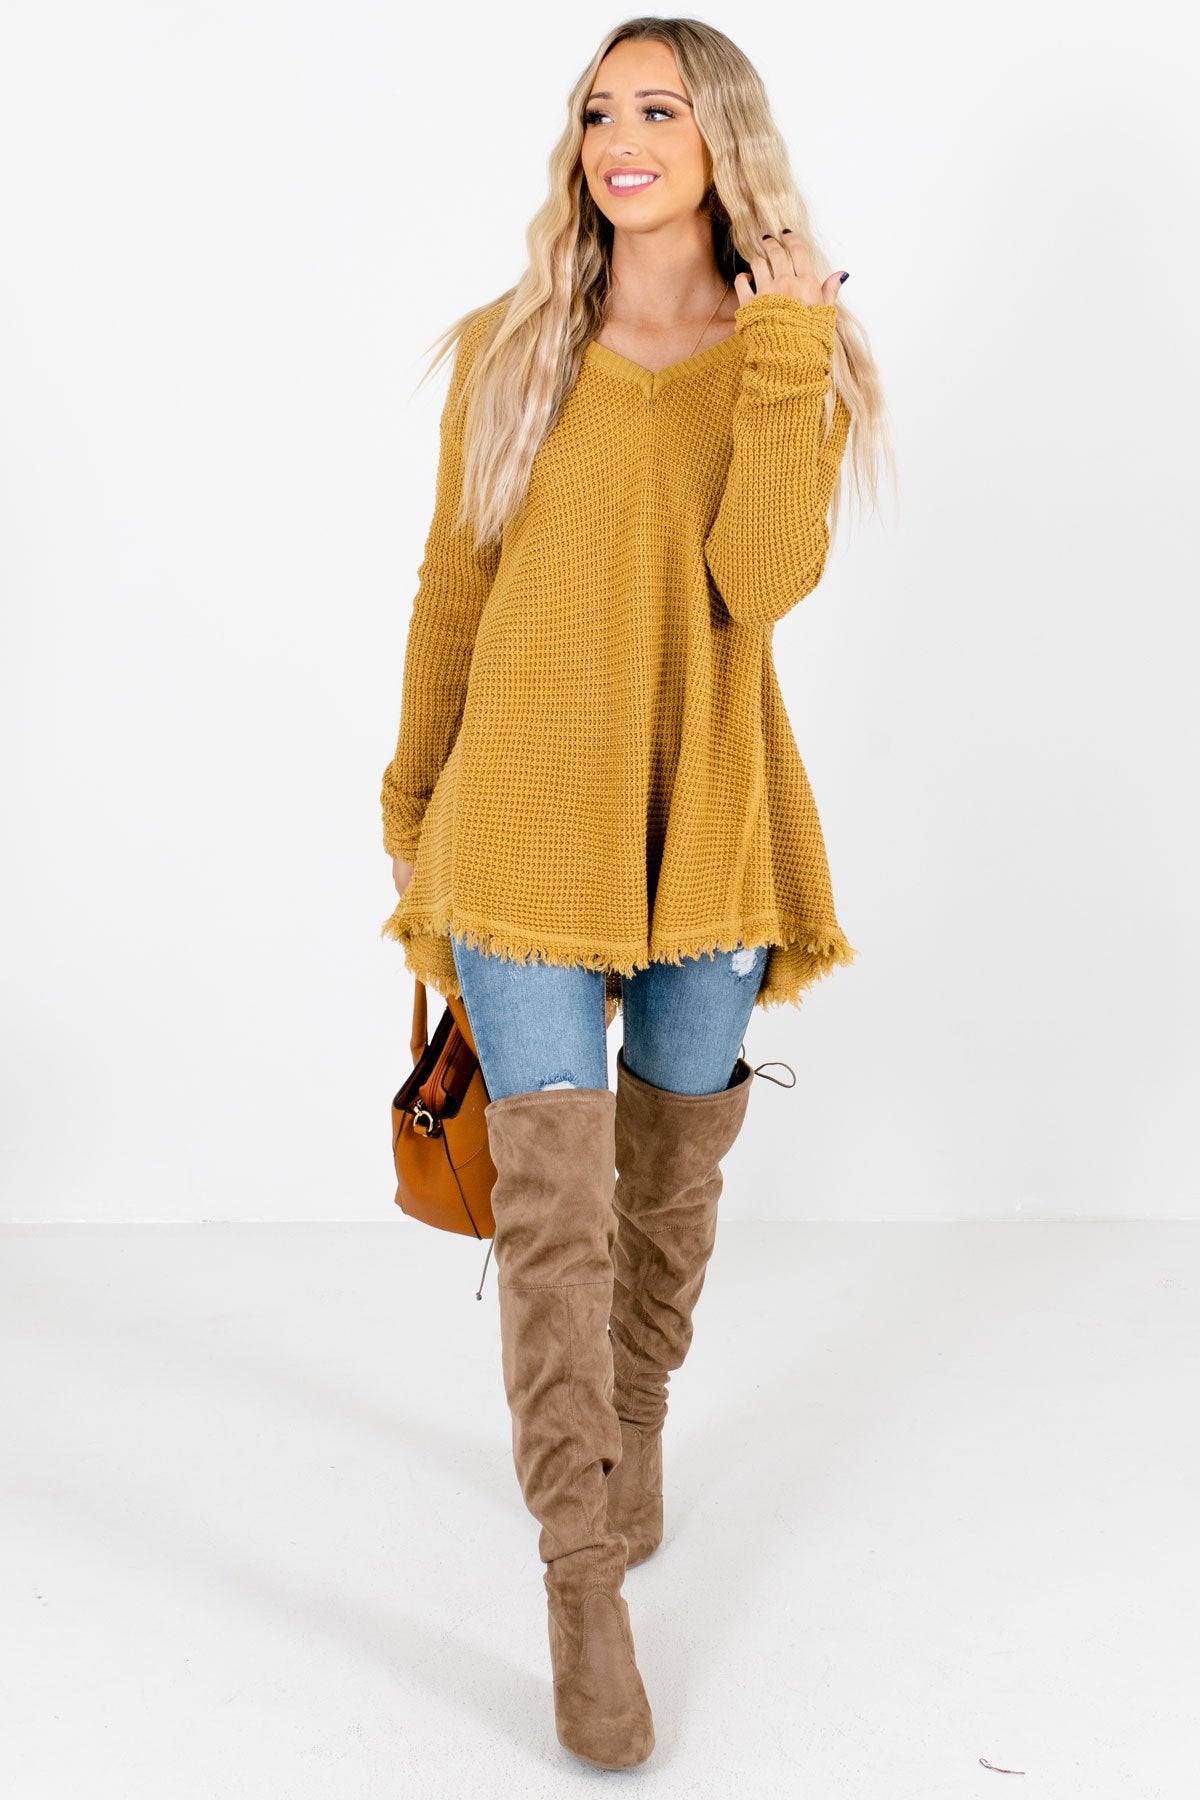 Women’s Mustard Warm and Cozy Boutique Sweater